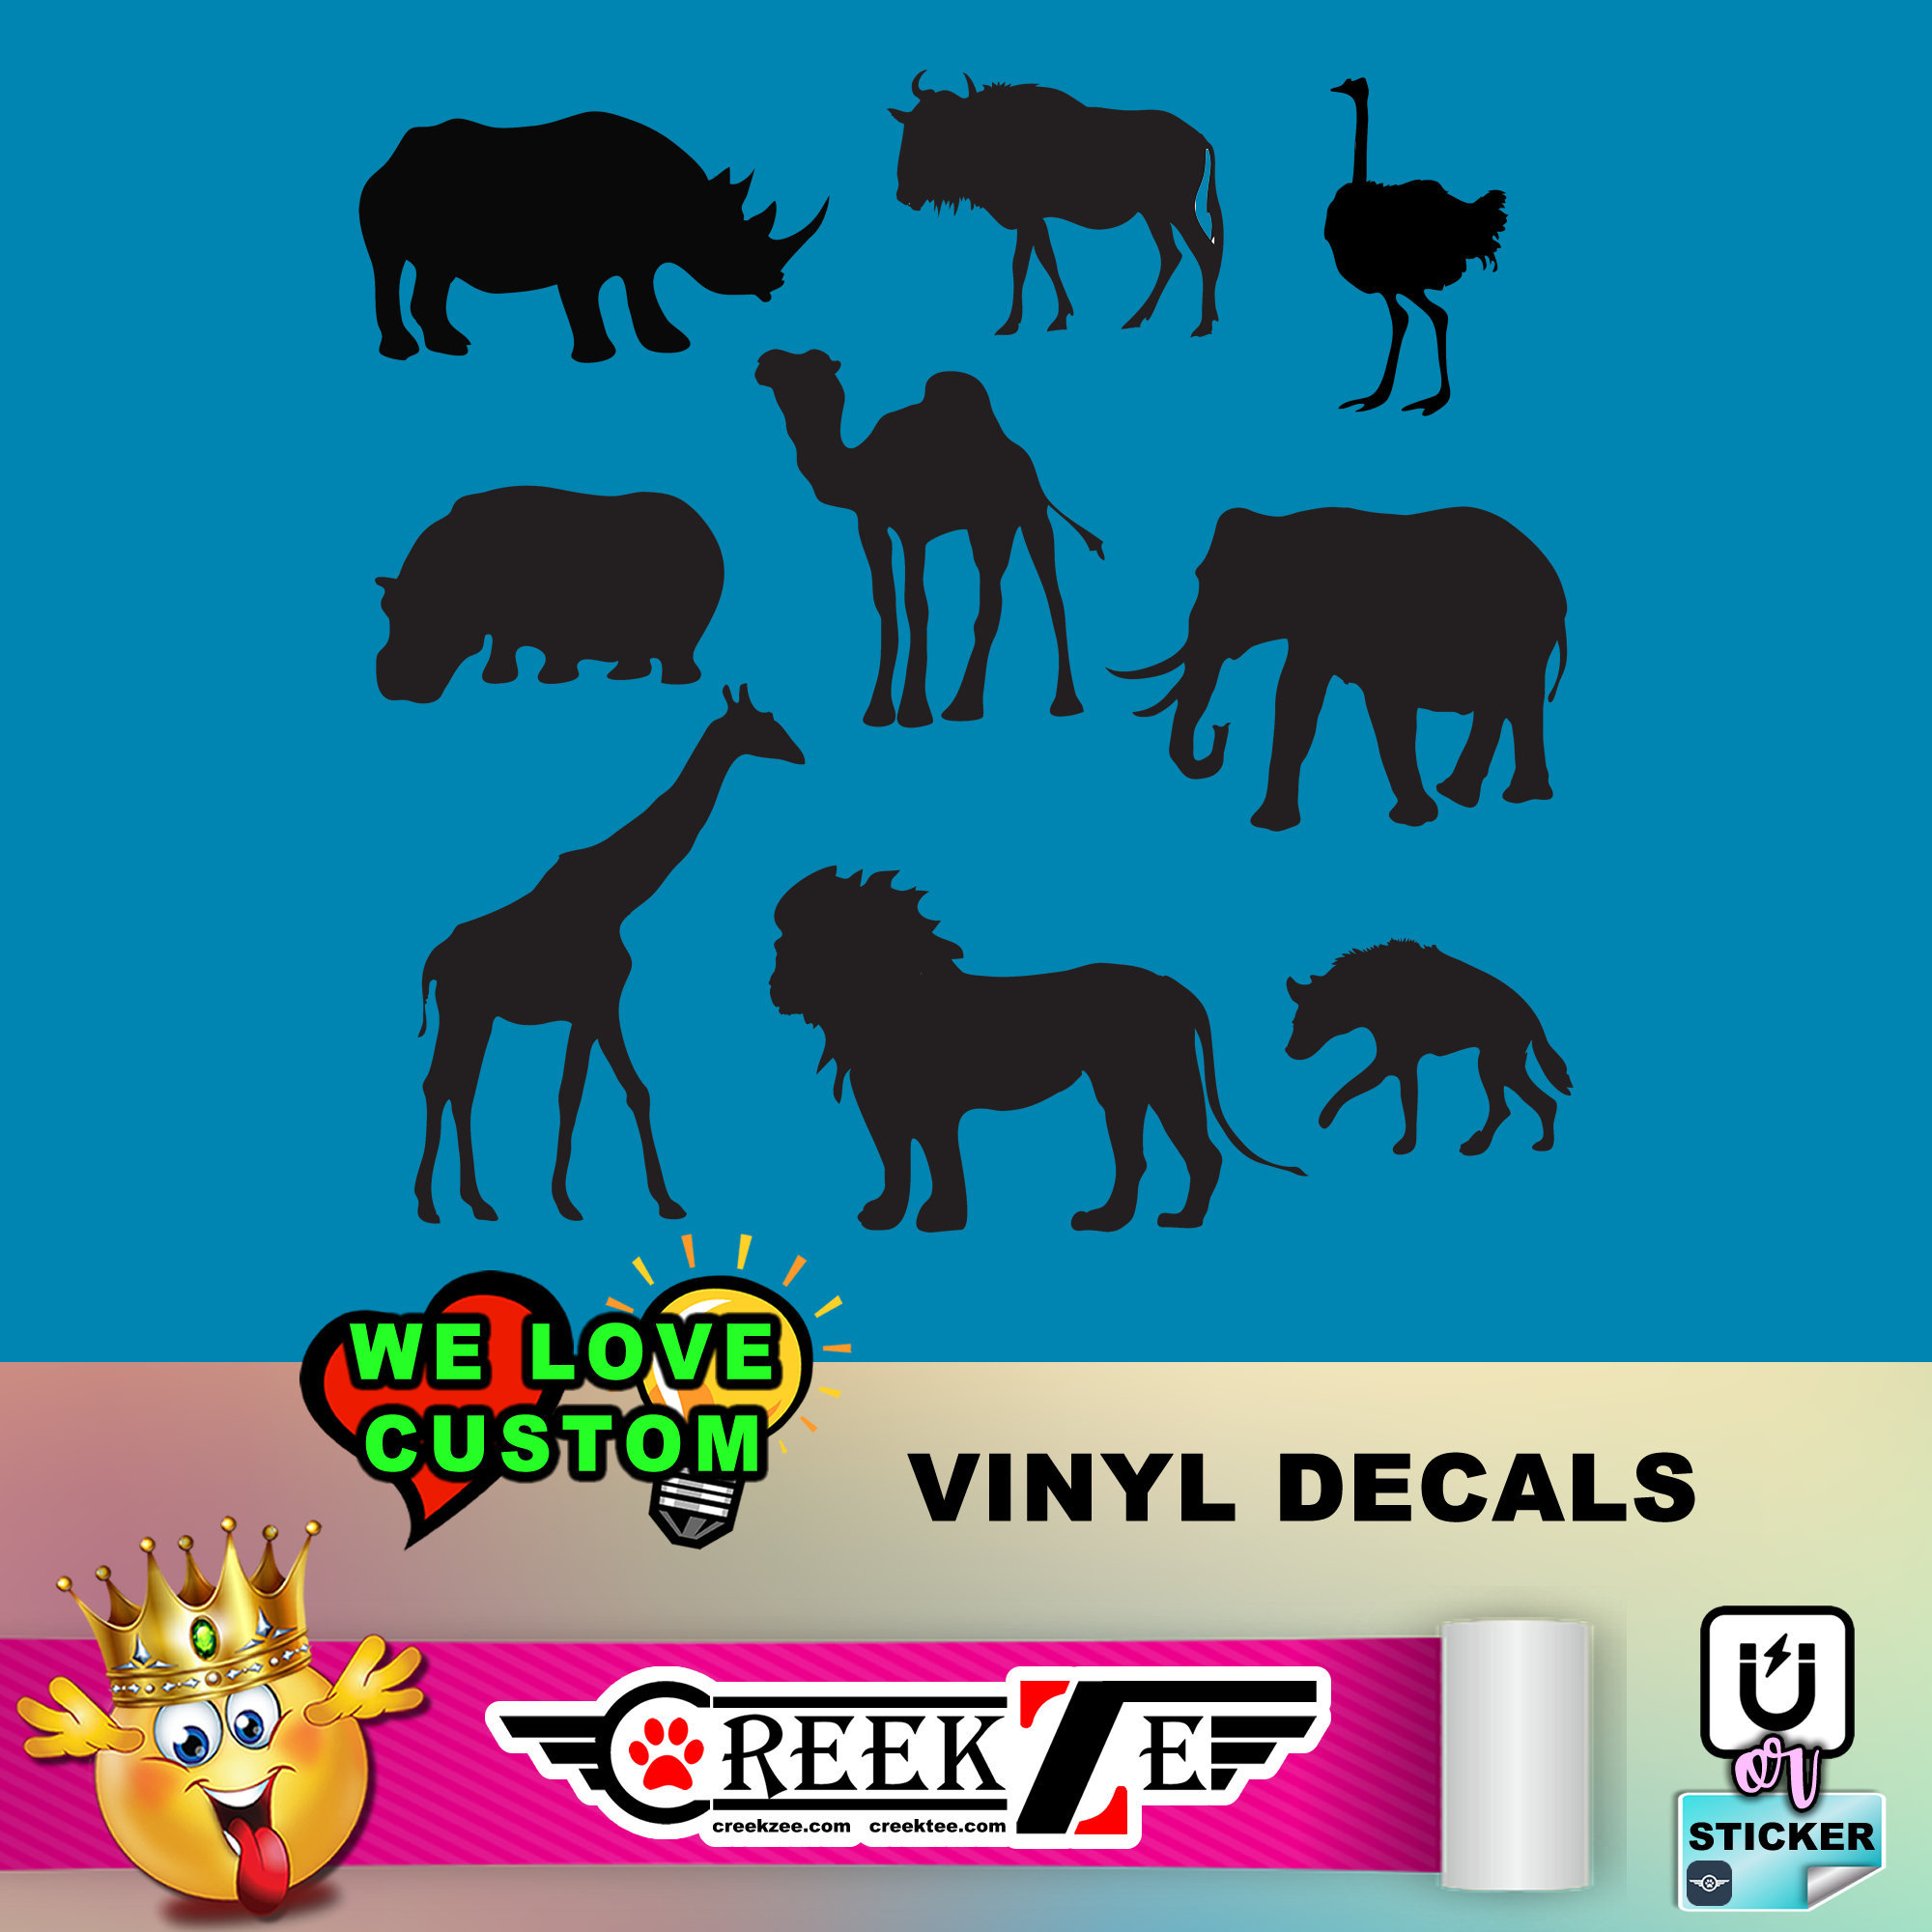 Animal Kingdom in various colors and sizes plus Chrome High Quality Cars, Trucks, Vans, Windows, Boats, Mailboxes